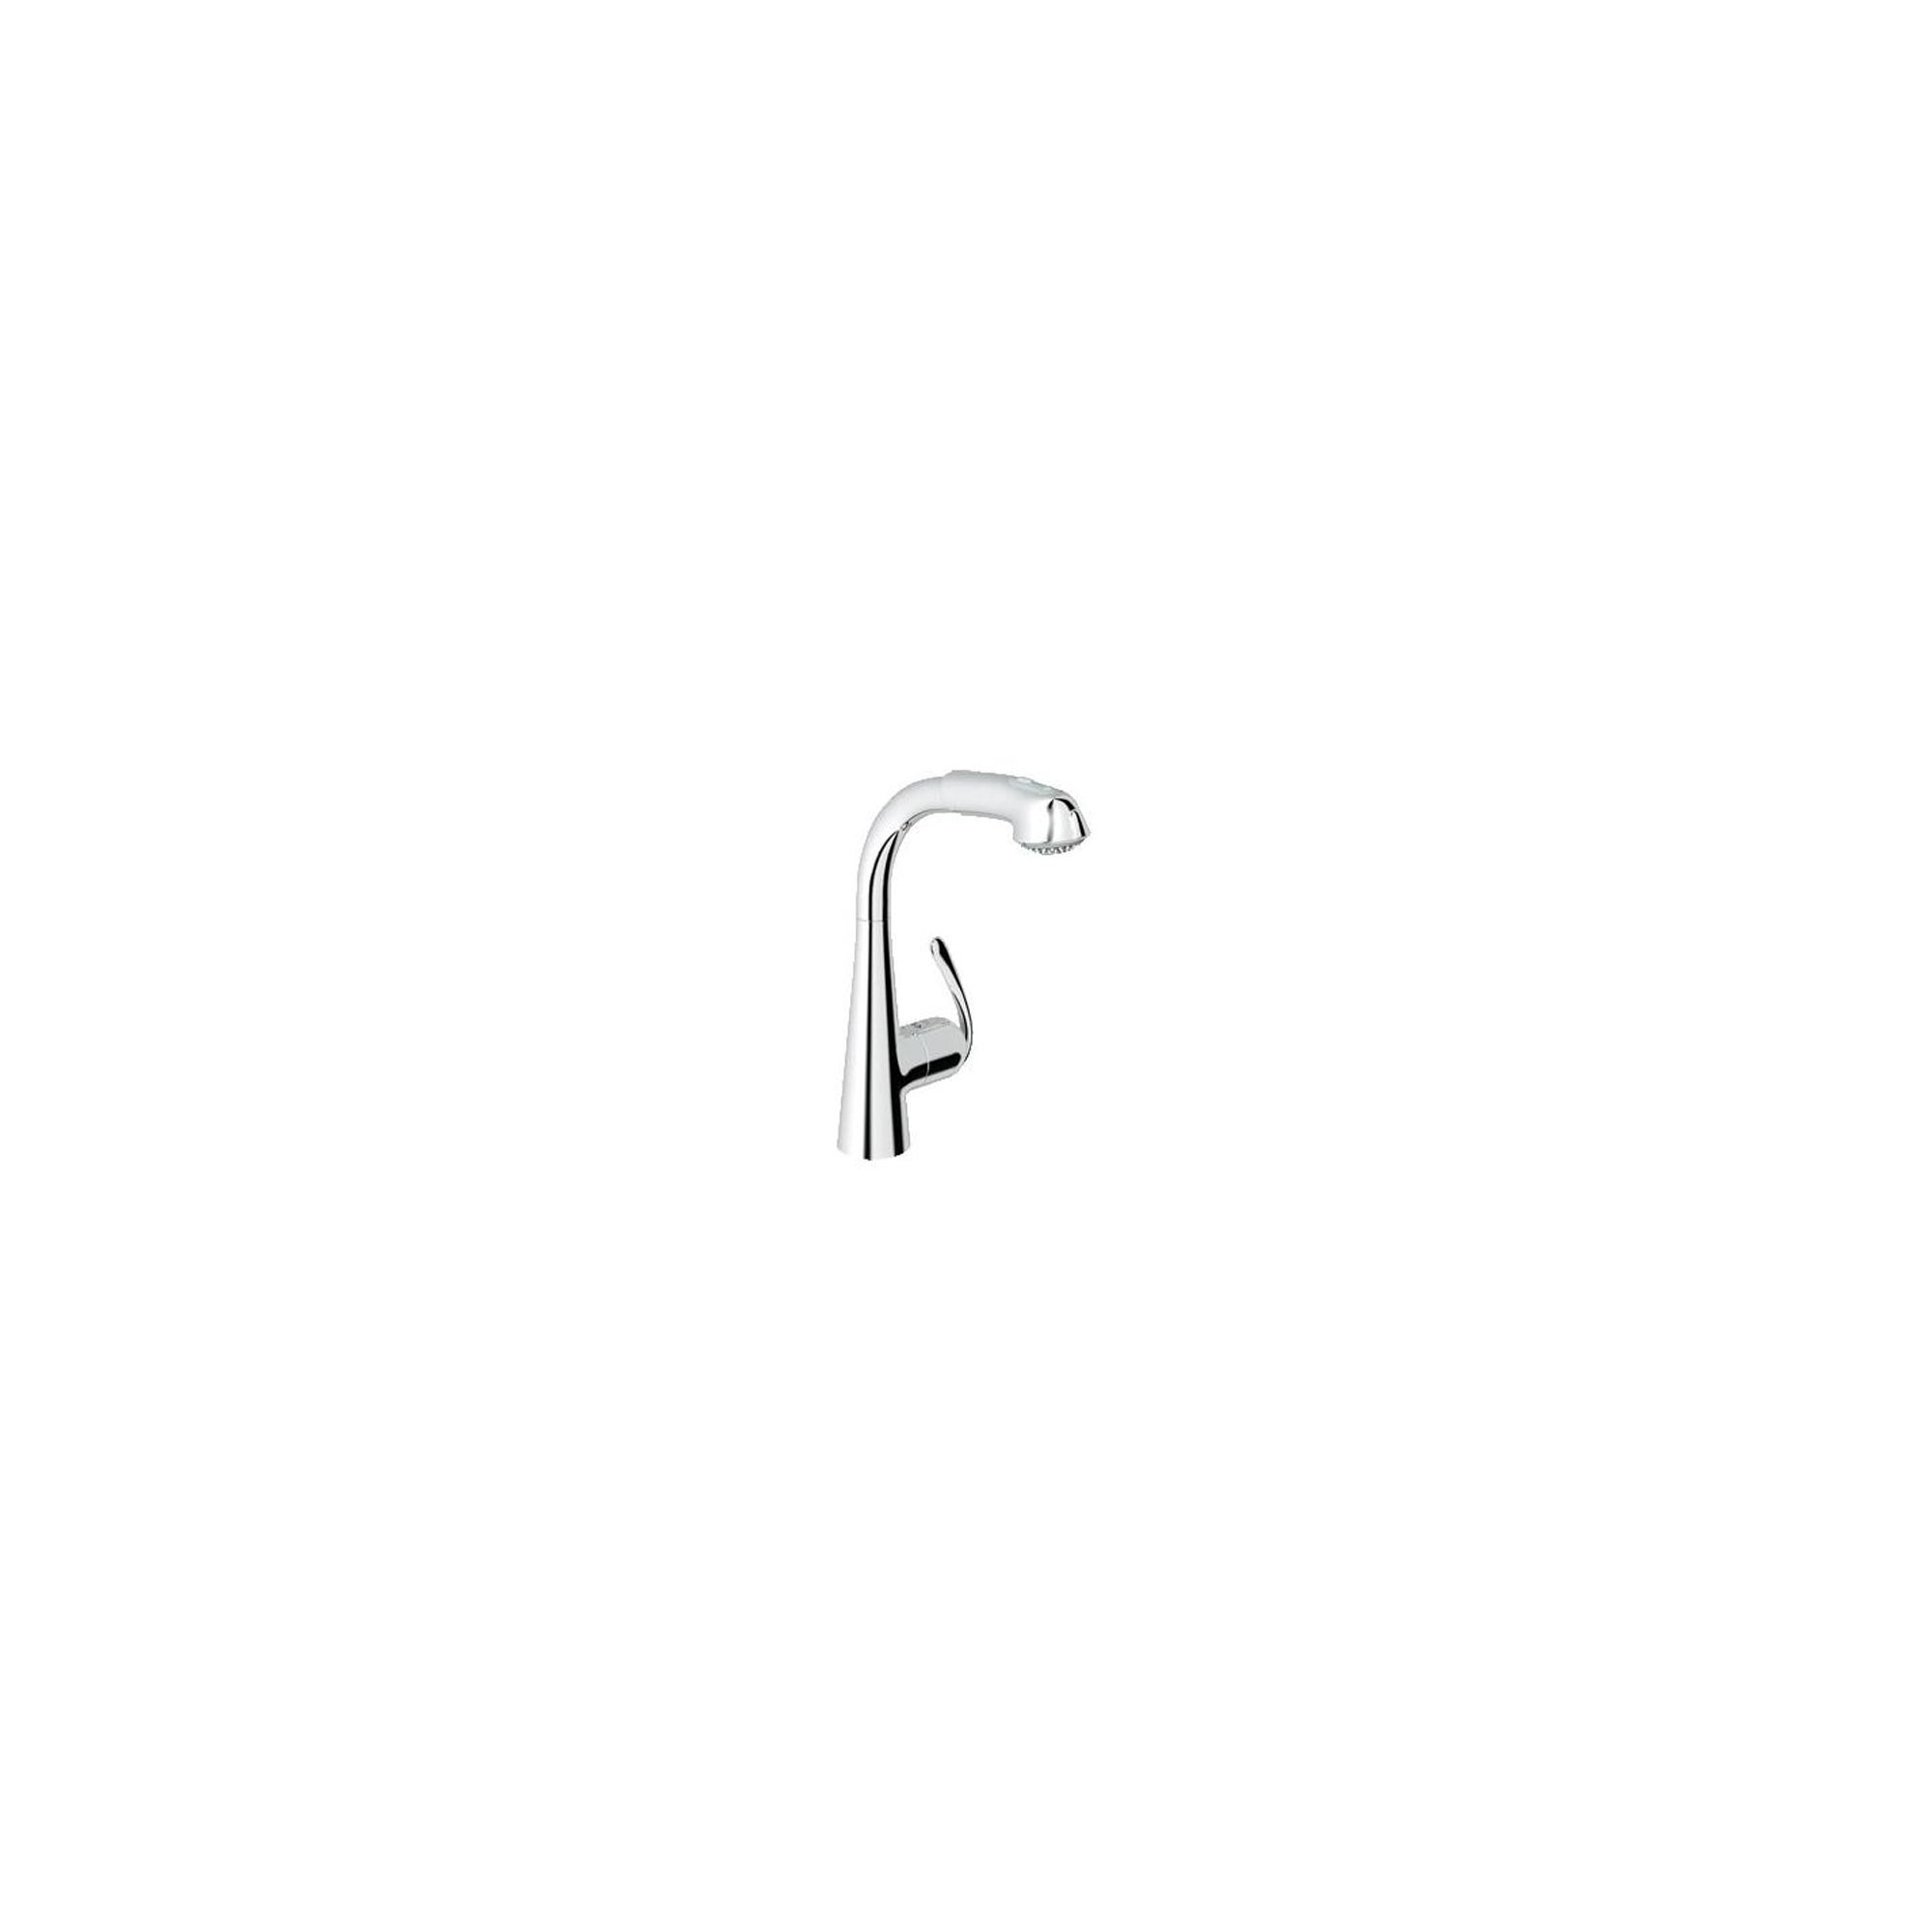 Grohe Zedra Mono Sink Mixer Tap, Pull-Out Spray, Single Handle, Chrome at Tesco Direct